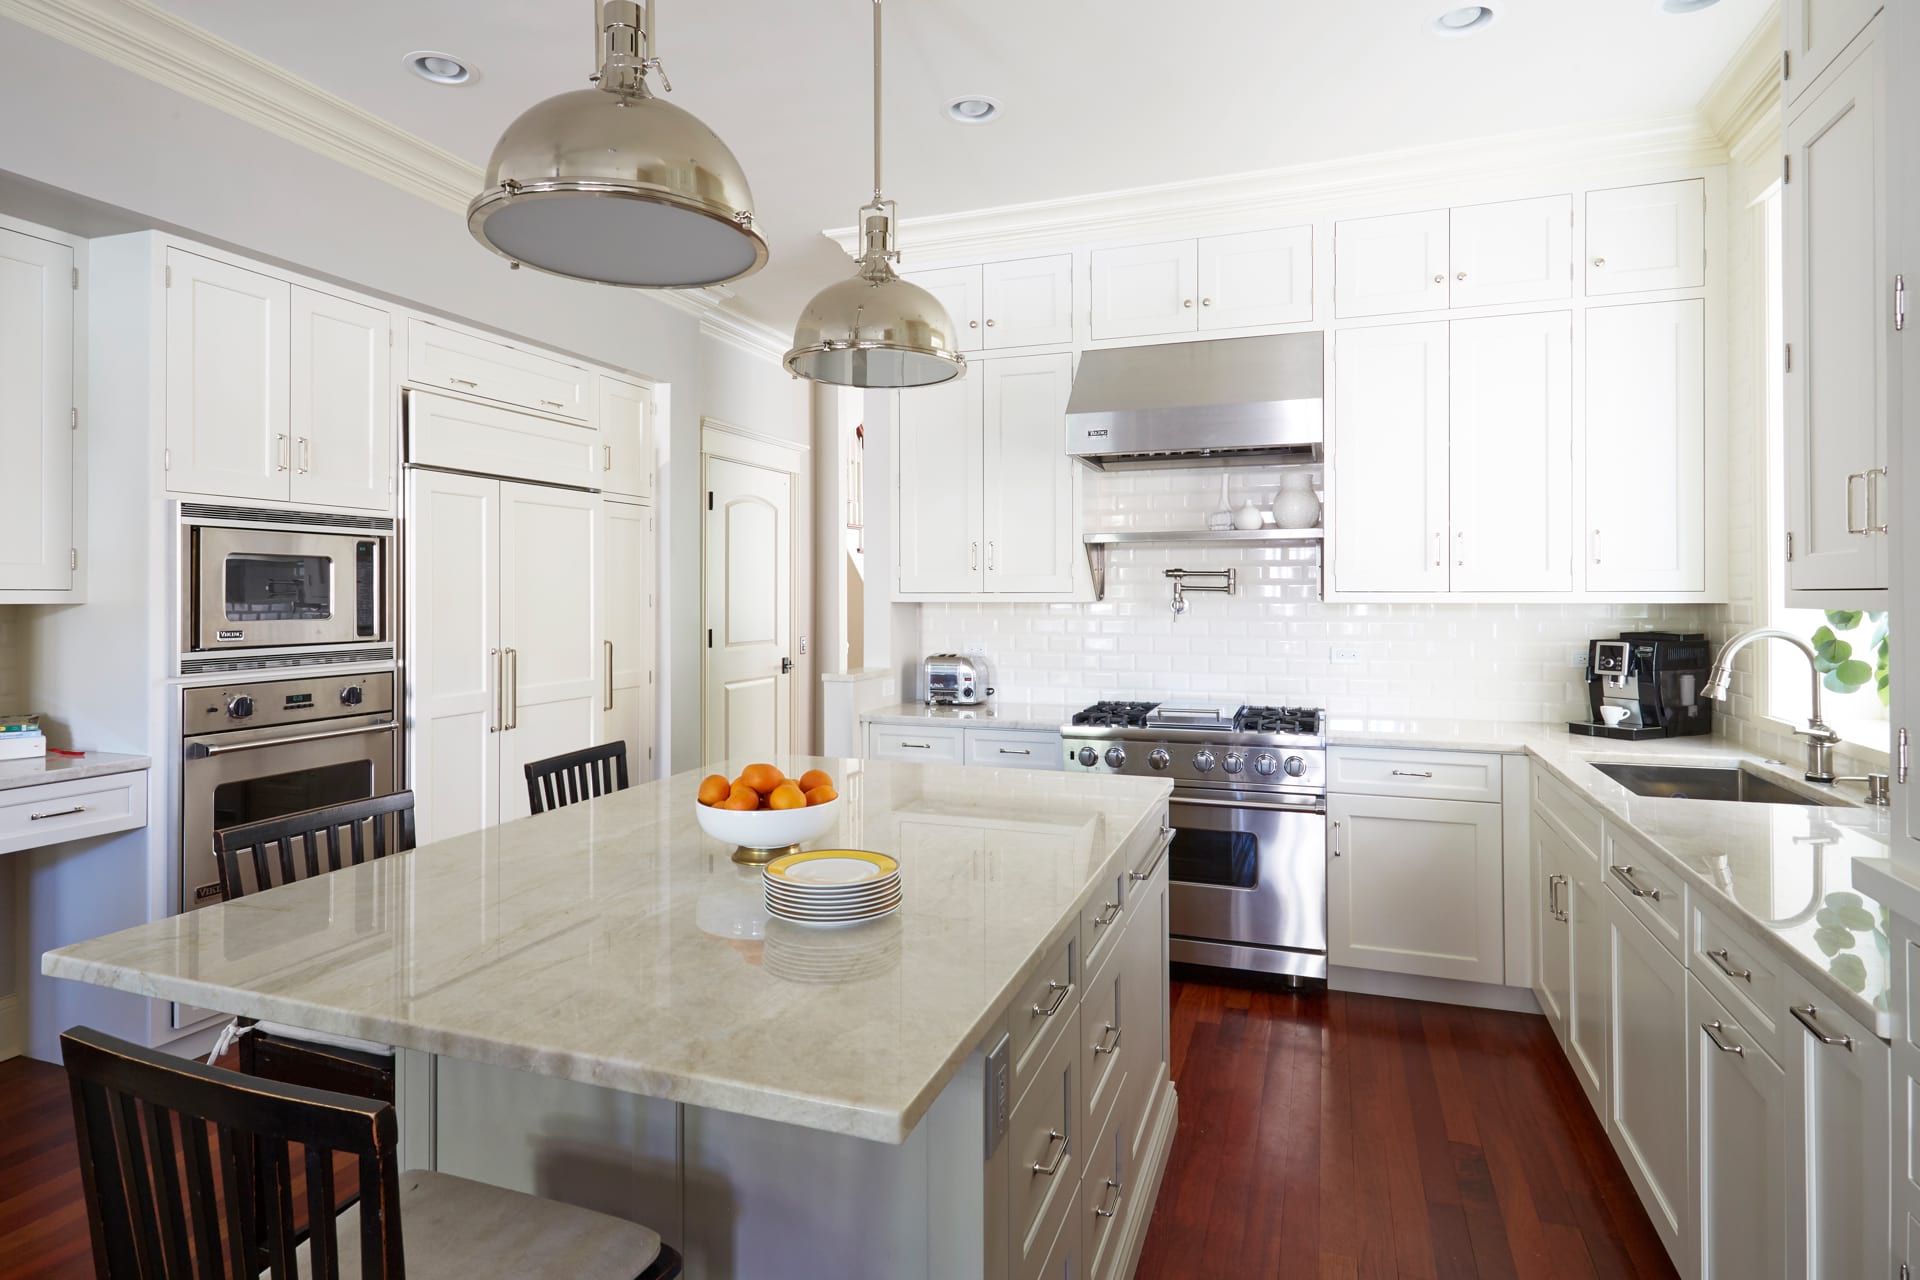 Functional island to the kitchen with beautiful white color combination